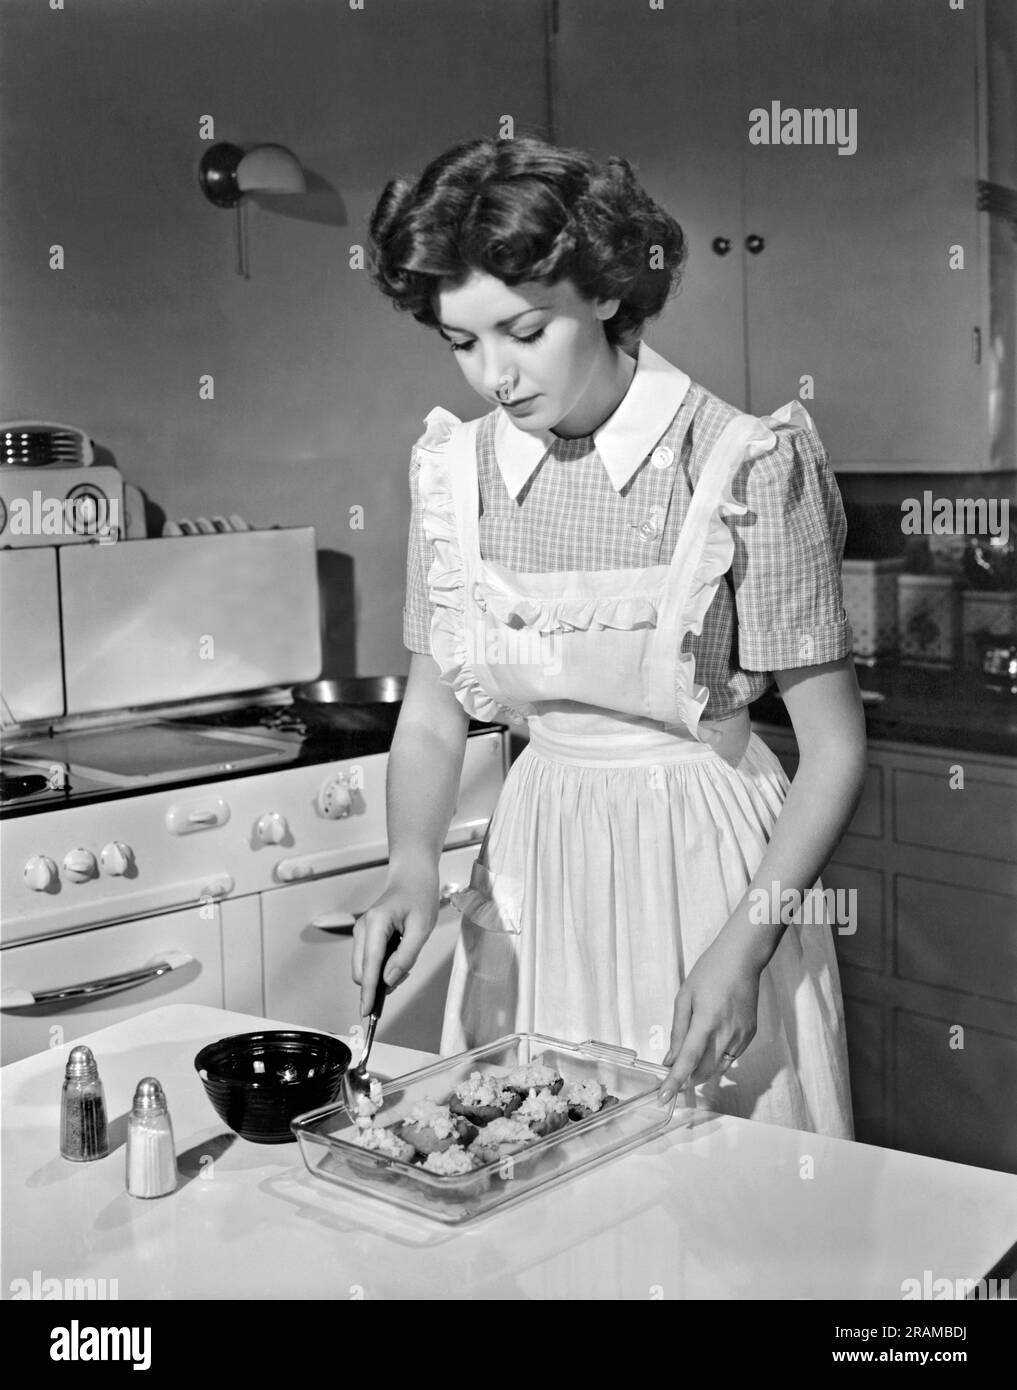 Hollywood, California:  1942. Actress Marsha Hunt prepares summer squash in her kitchen. She was blacklisted during the 1940's and 50's for her First Amendment stands. Stock Photo